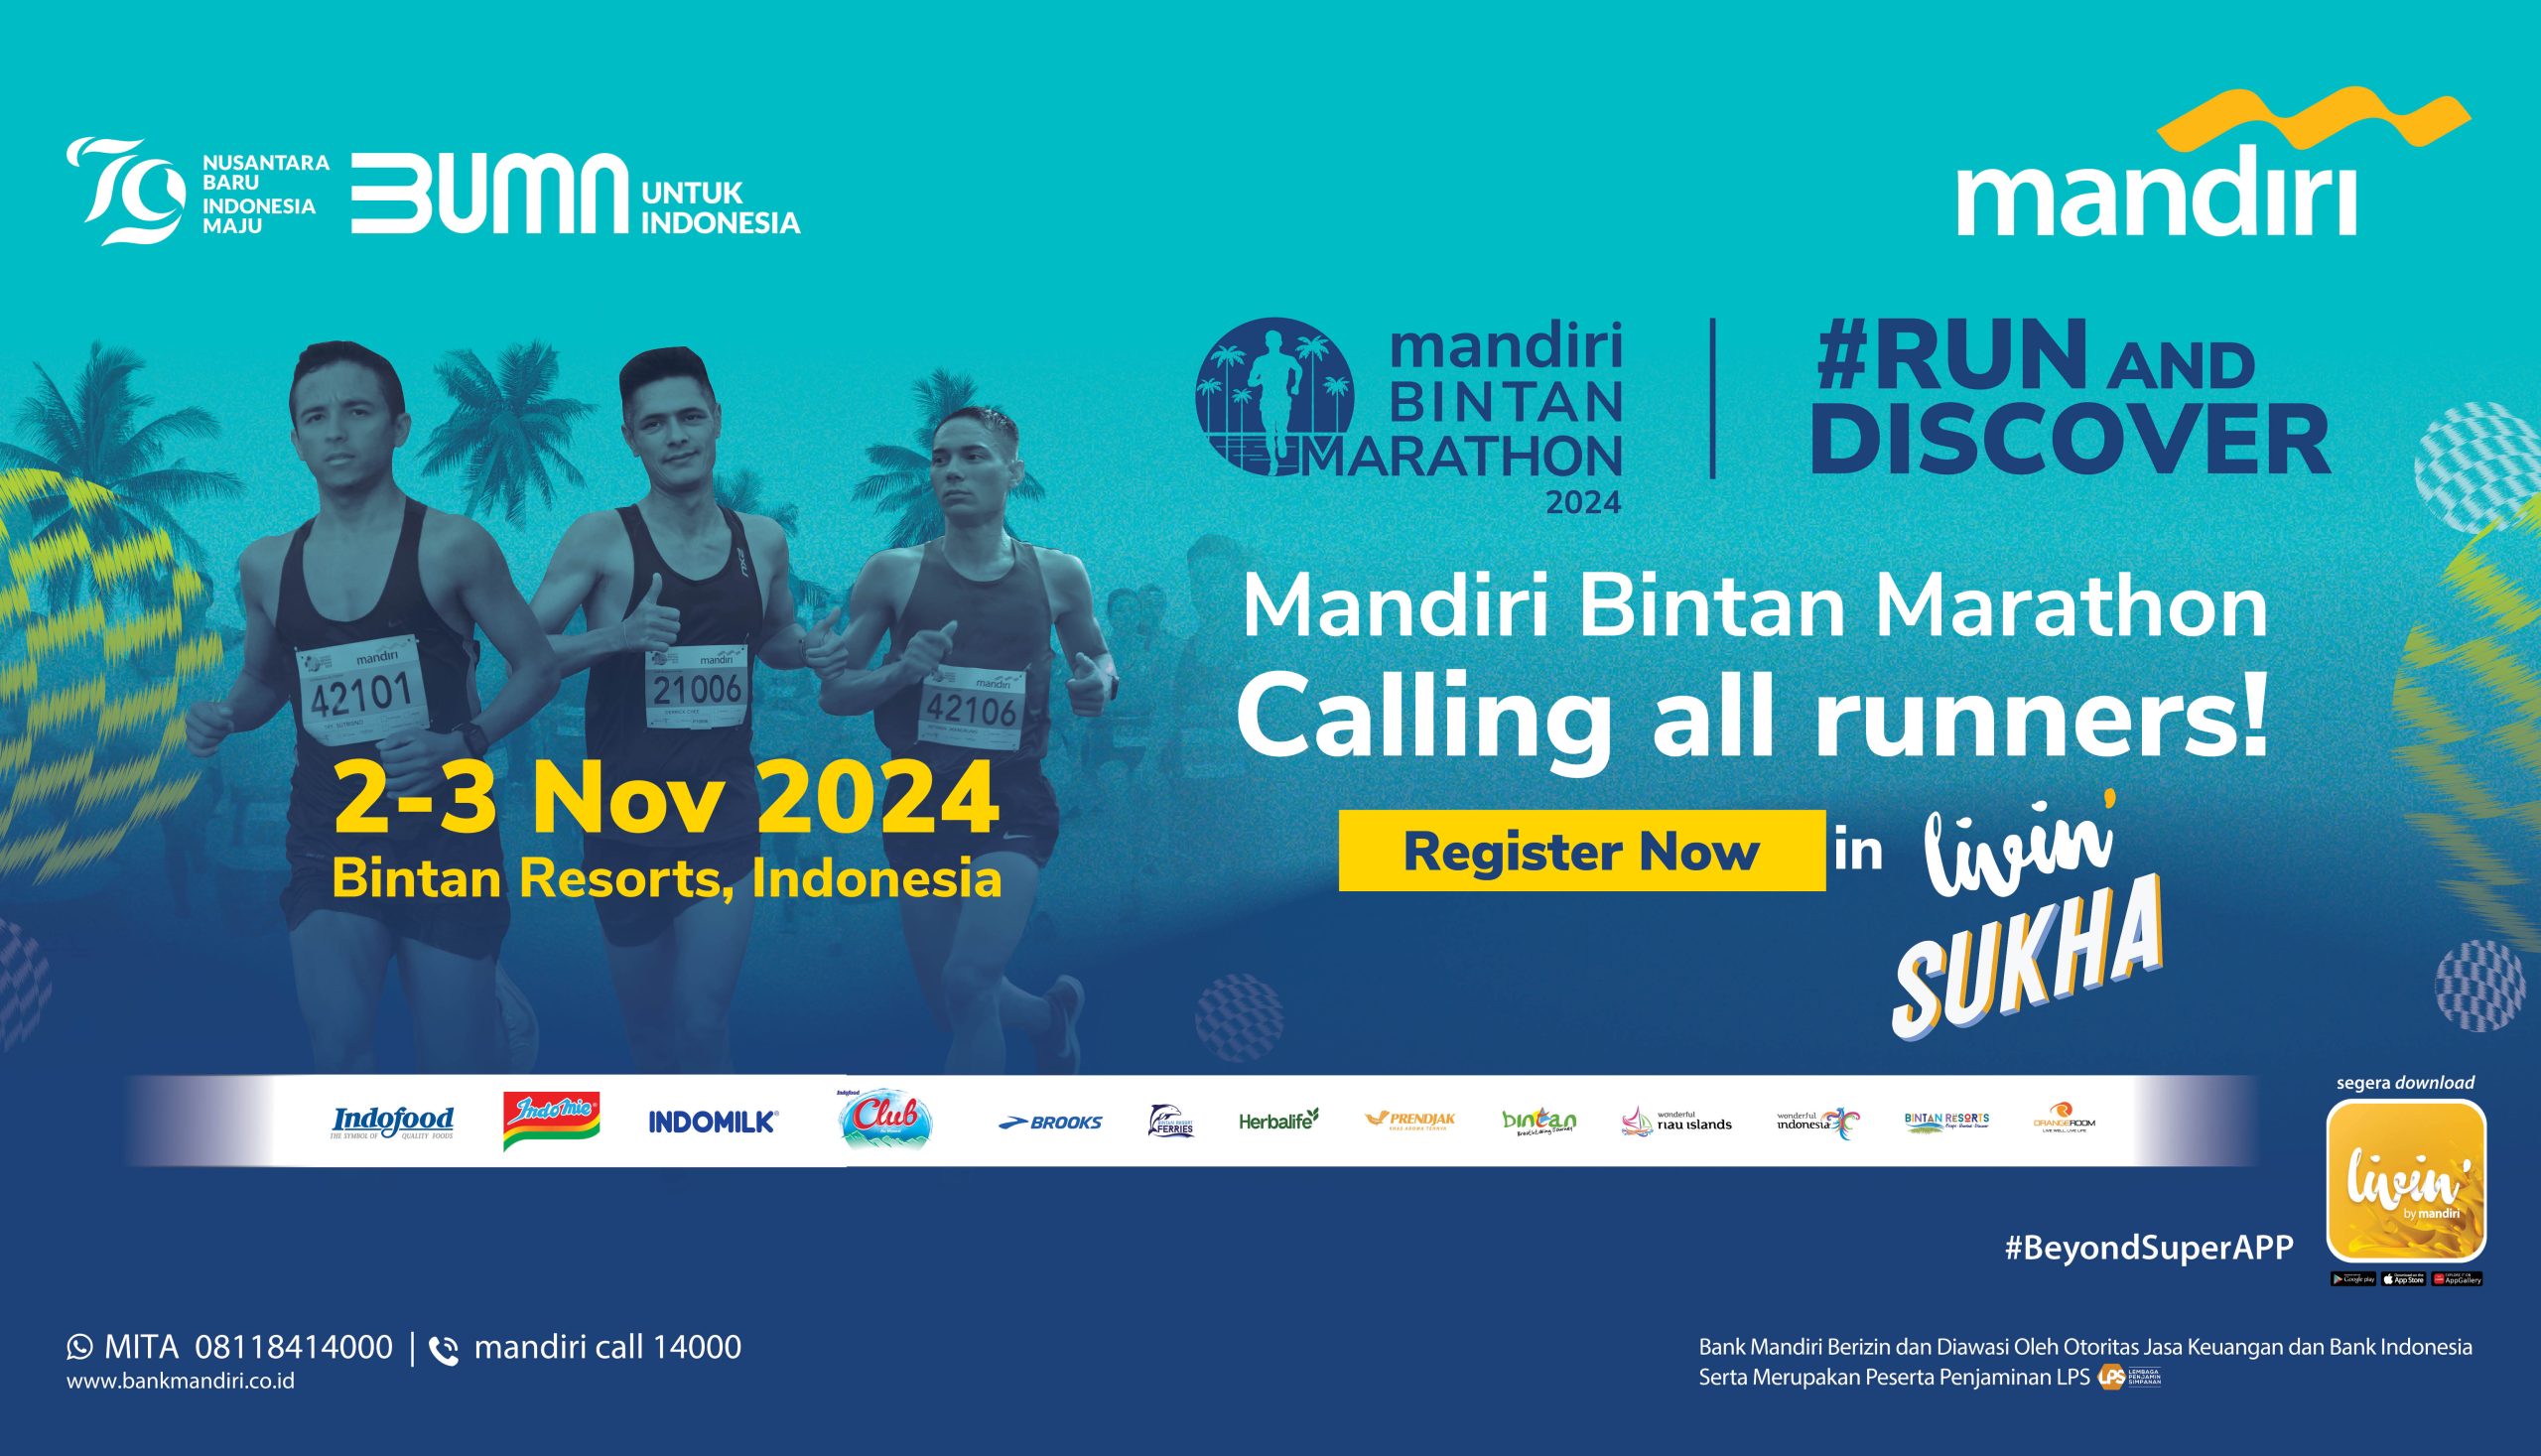 Mandiri Bank and Indofood Join Forces to Elevate the 2024 Bintan Marathon Experience